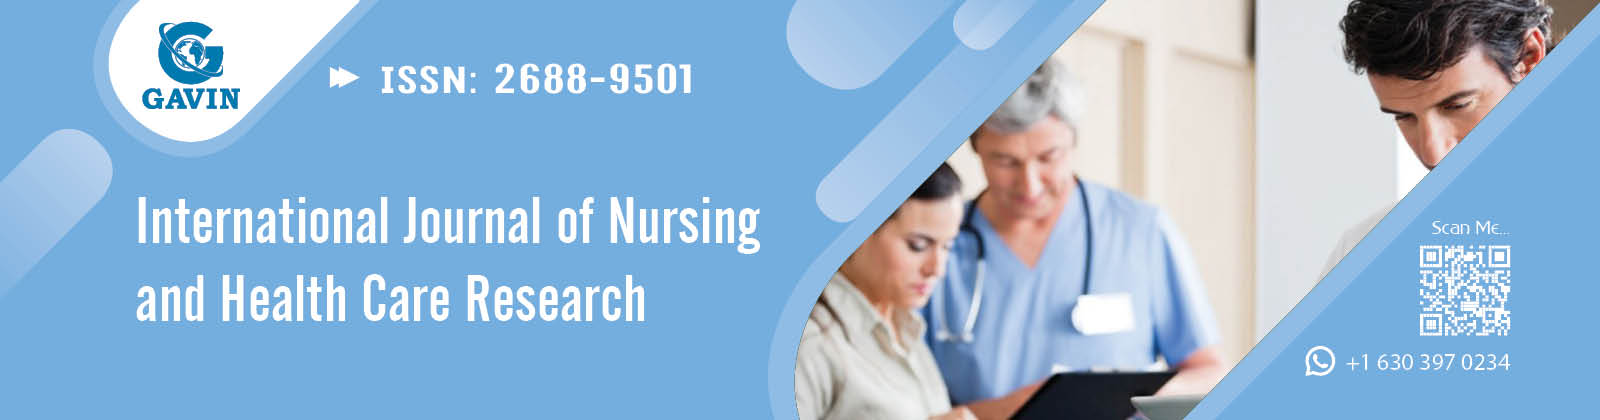 International Journal of Nursing and Health Care Research